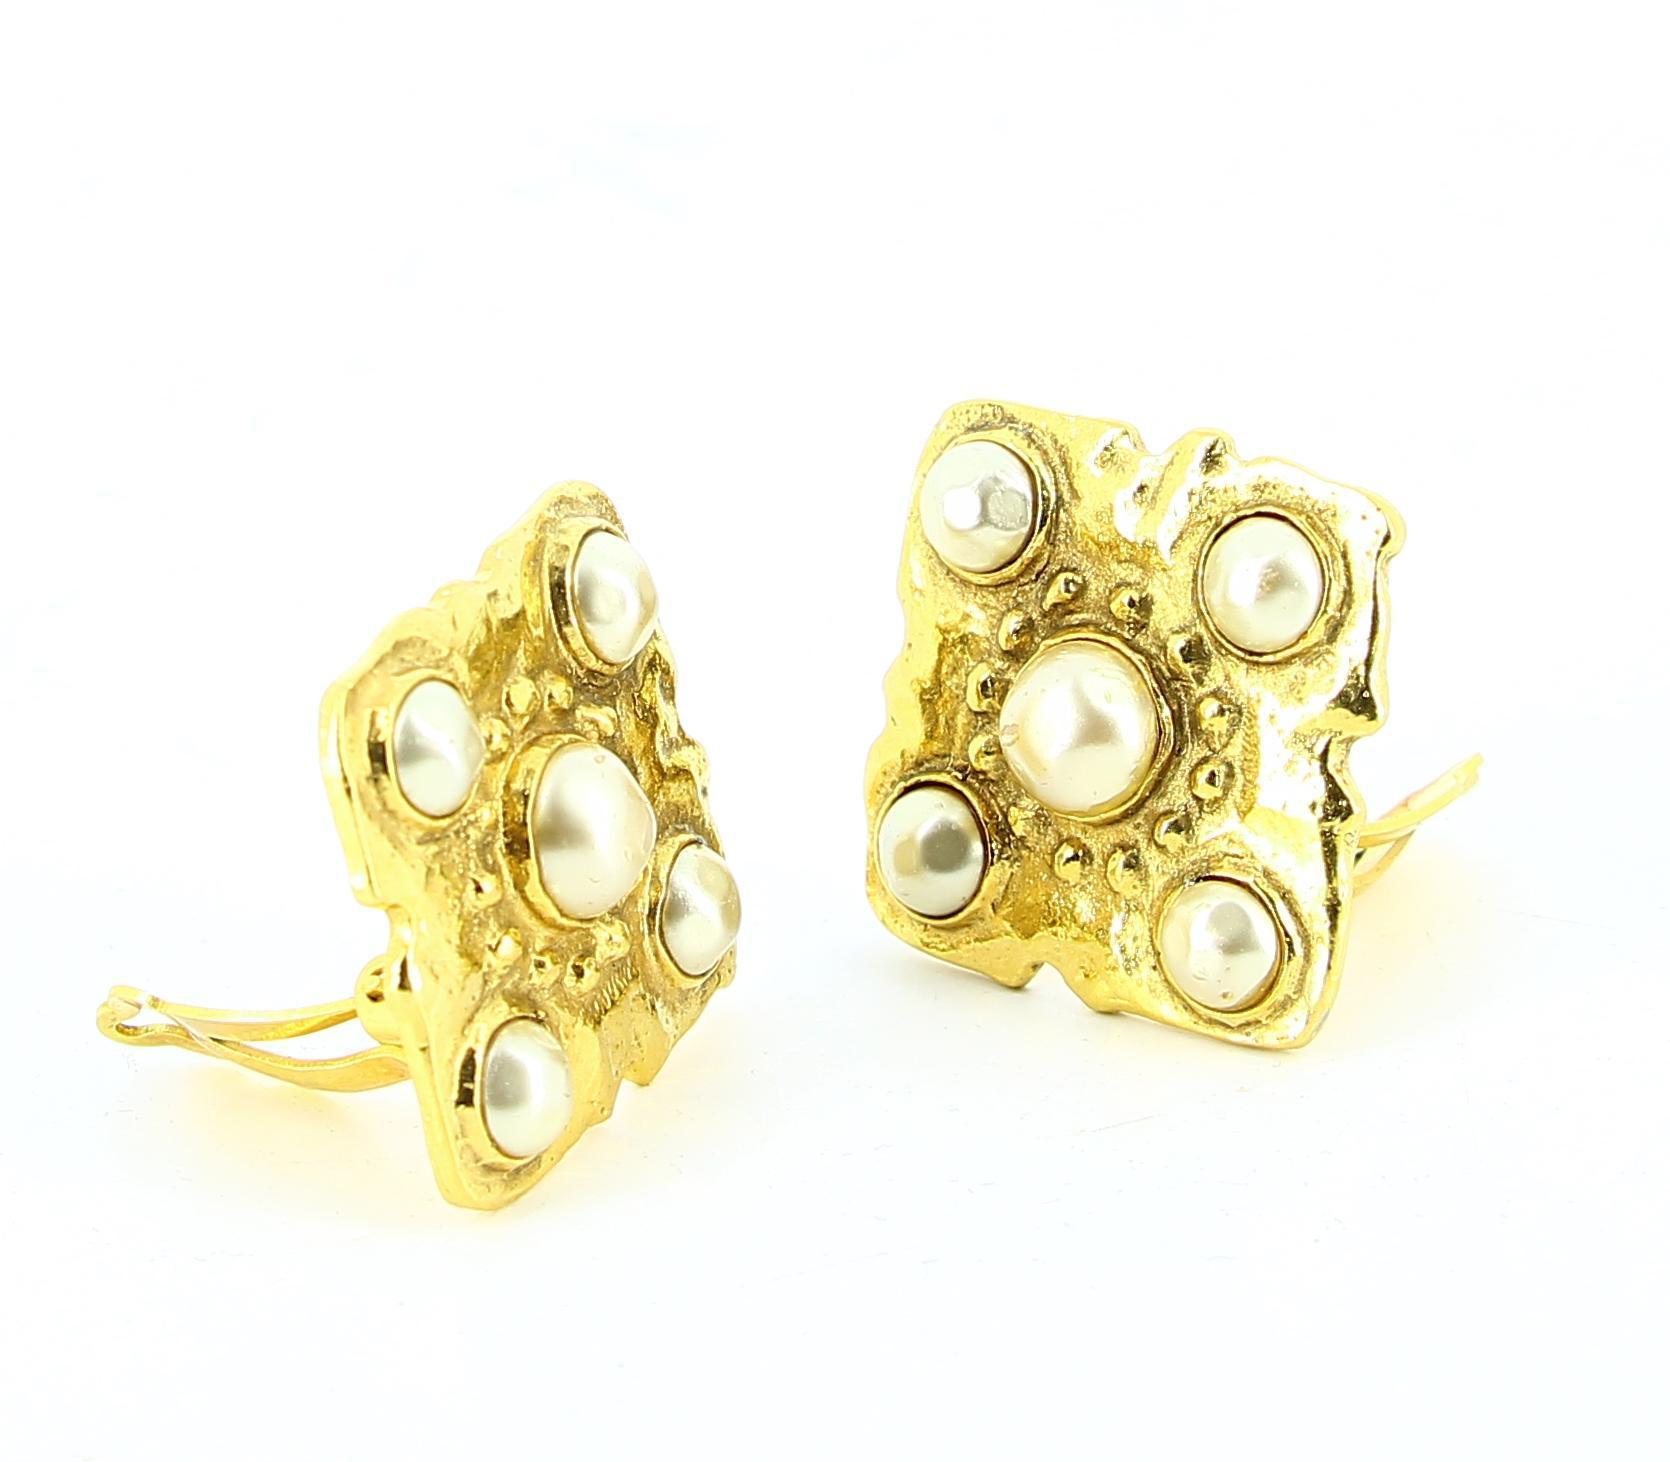 Women's or Men's Chanel Gold Earrings with Pearls